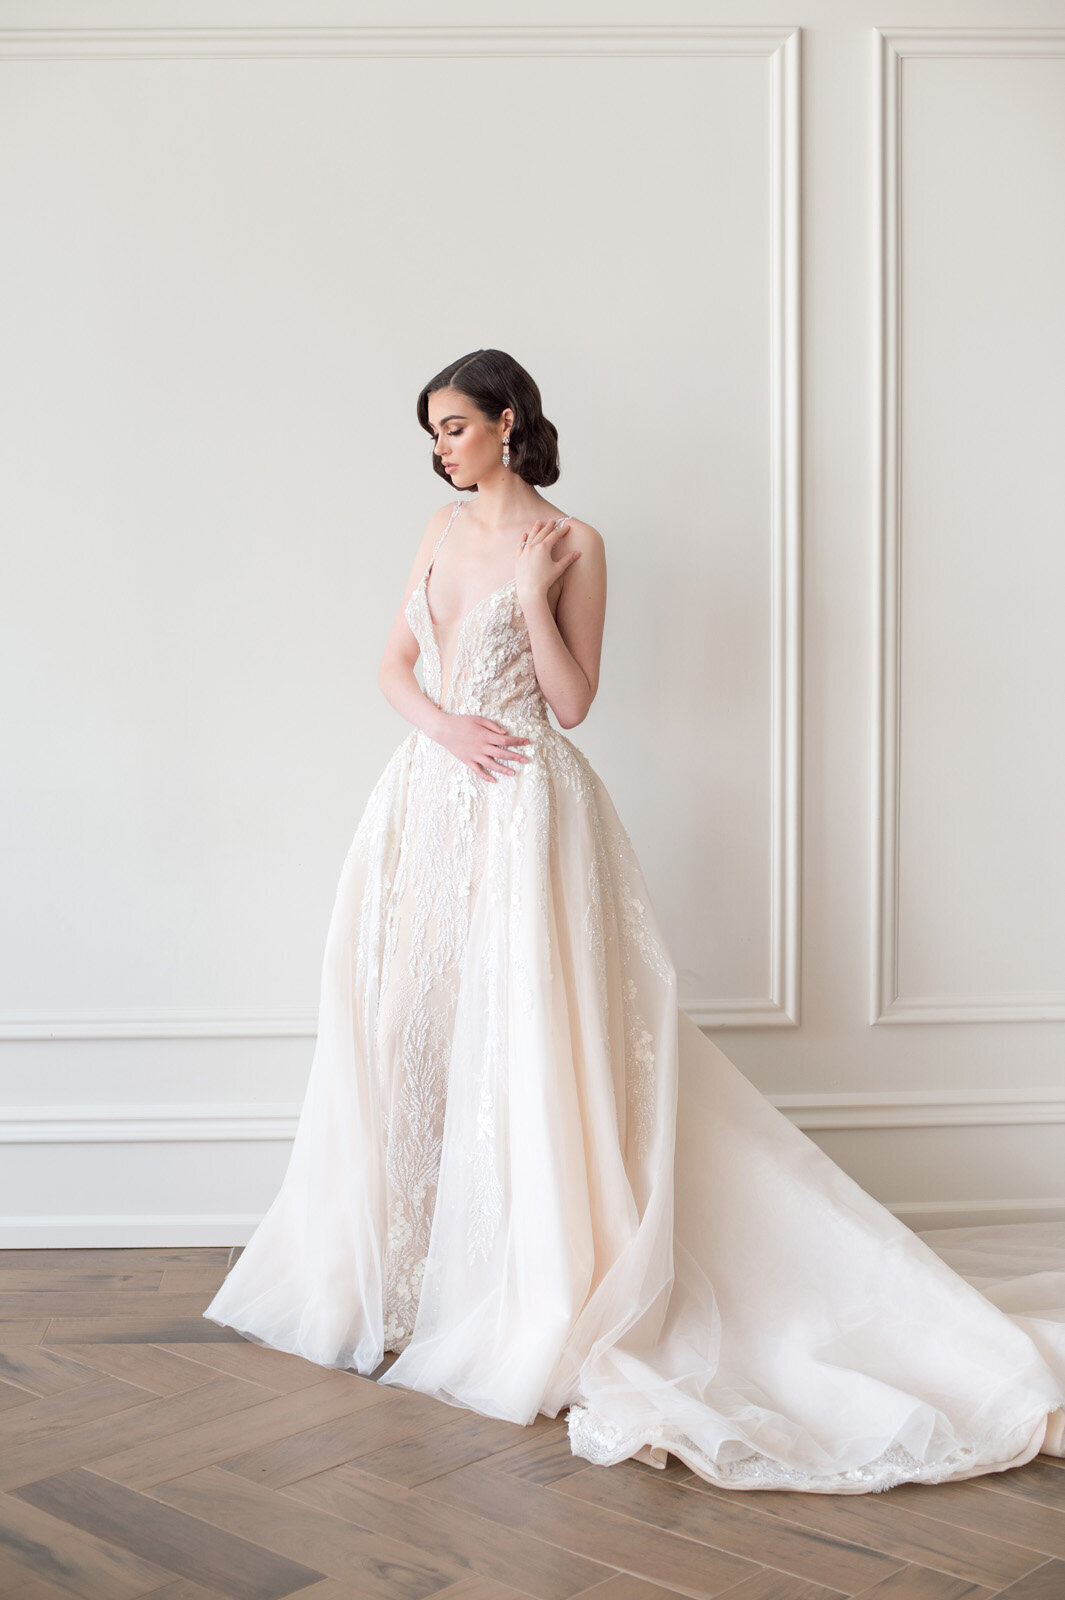 Diana-Pires-Events-Fiore-Wedluxe-16